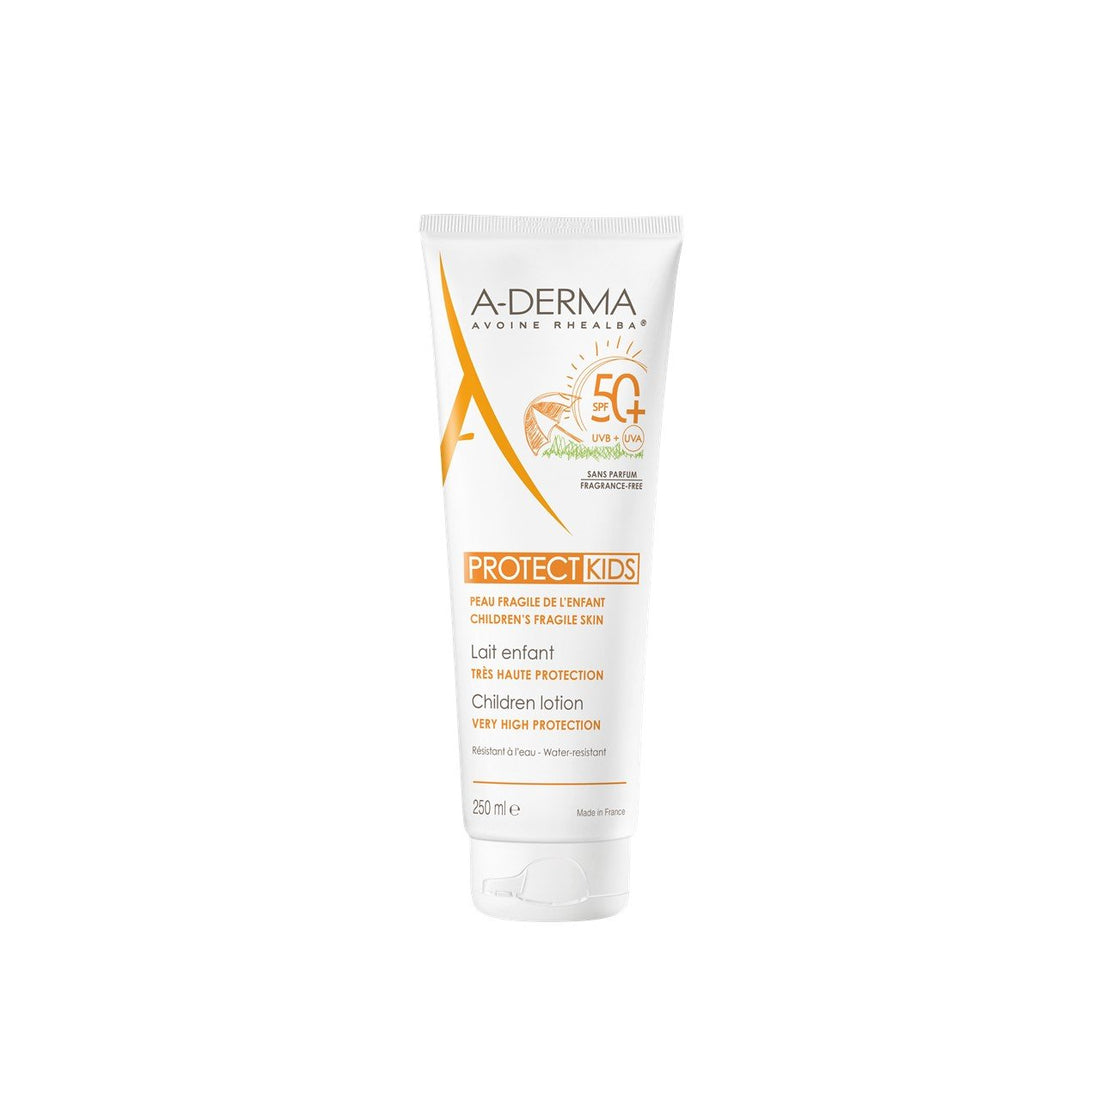 A-Derma Protect Kids Lotion for Children SPF50+ 250ml